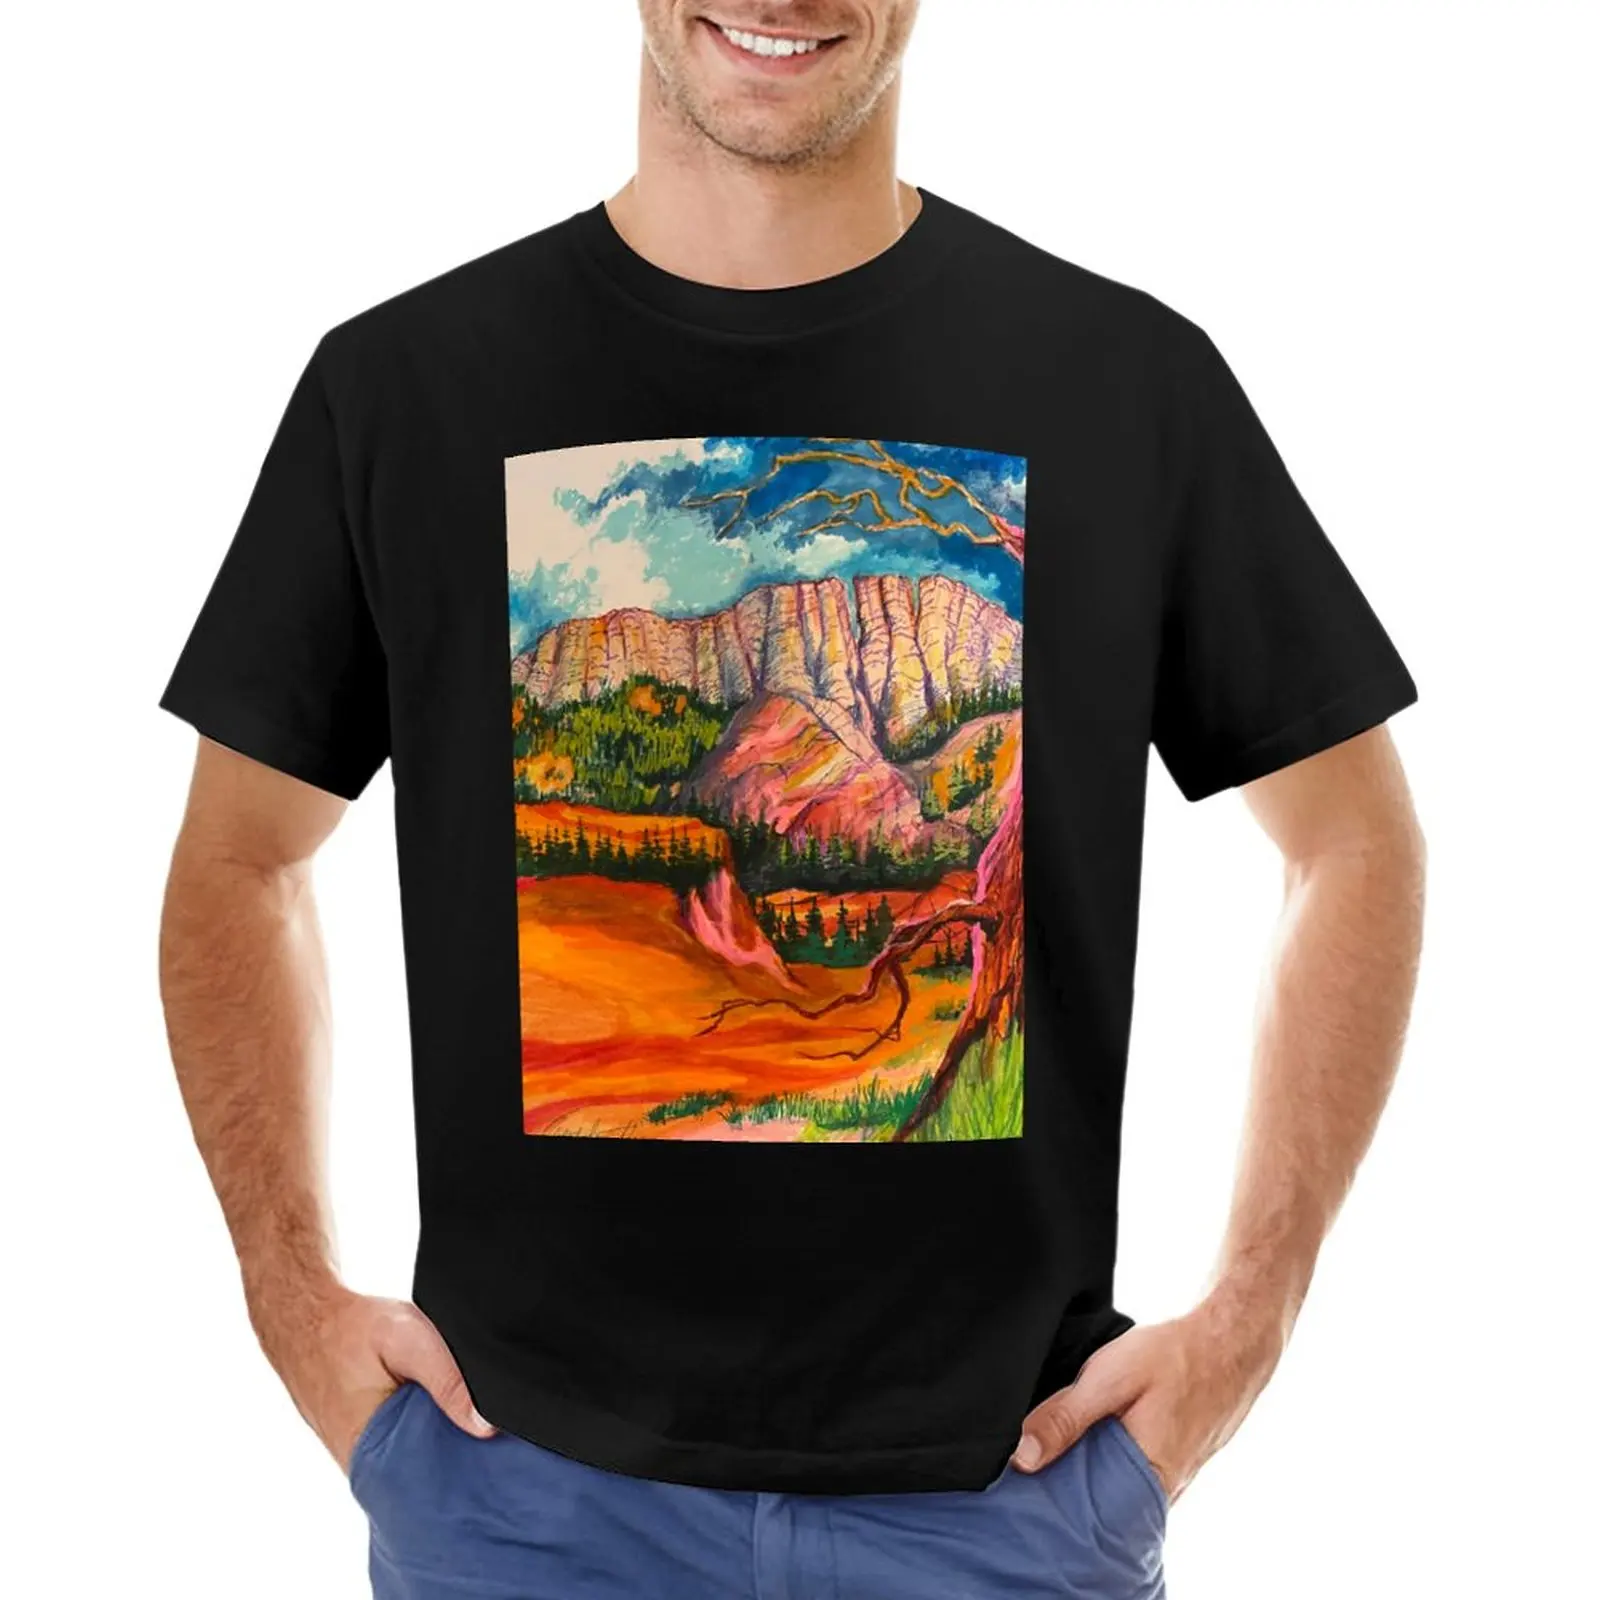 

Horse tooth Mountain Fort Collins CO T-Shirt tops Short sleeve tee custom t shirts design your own Men's t-shirts